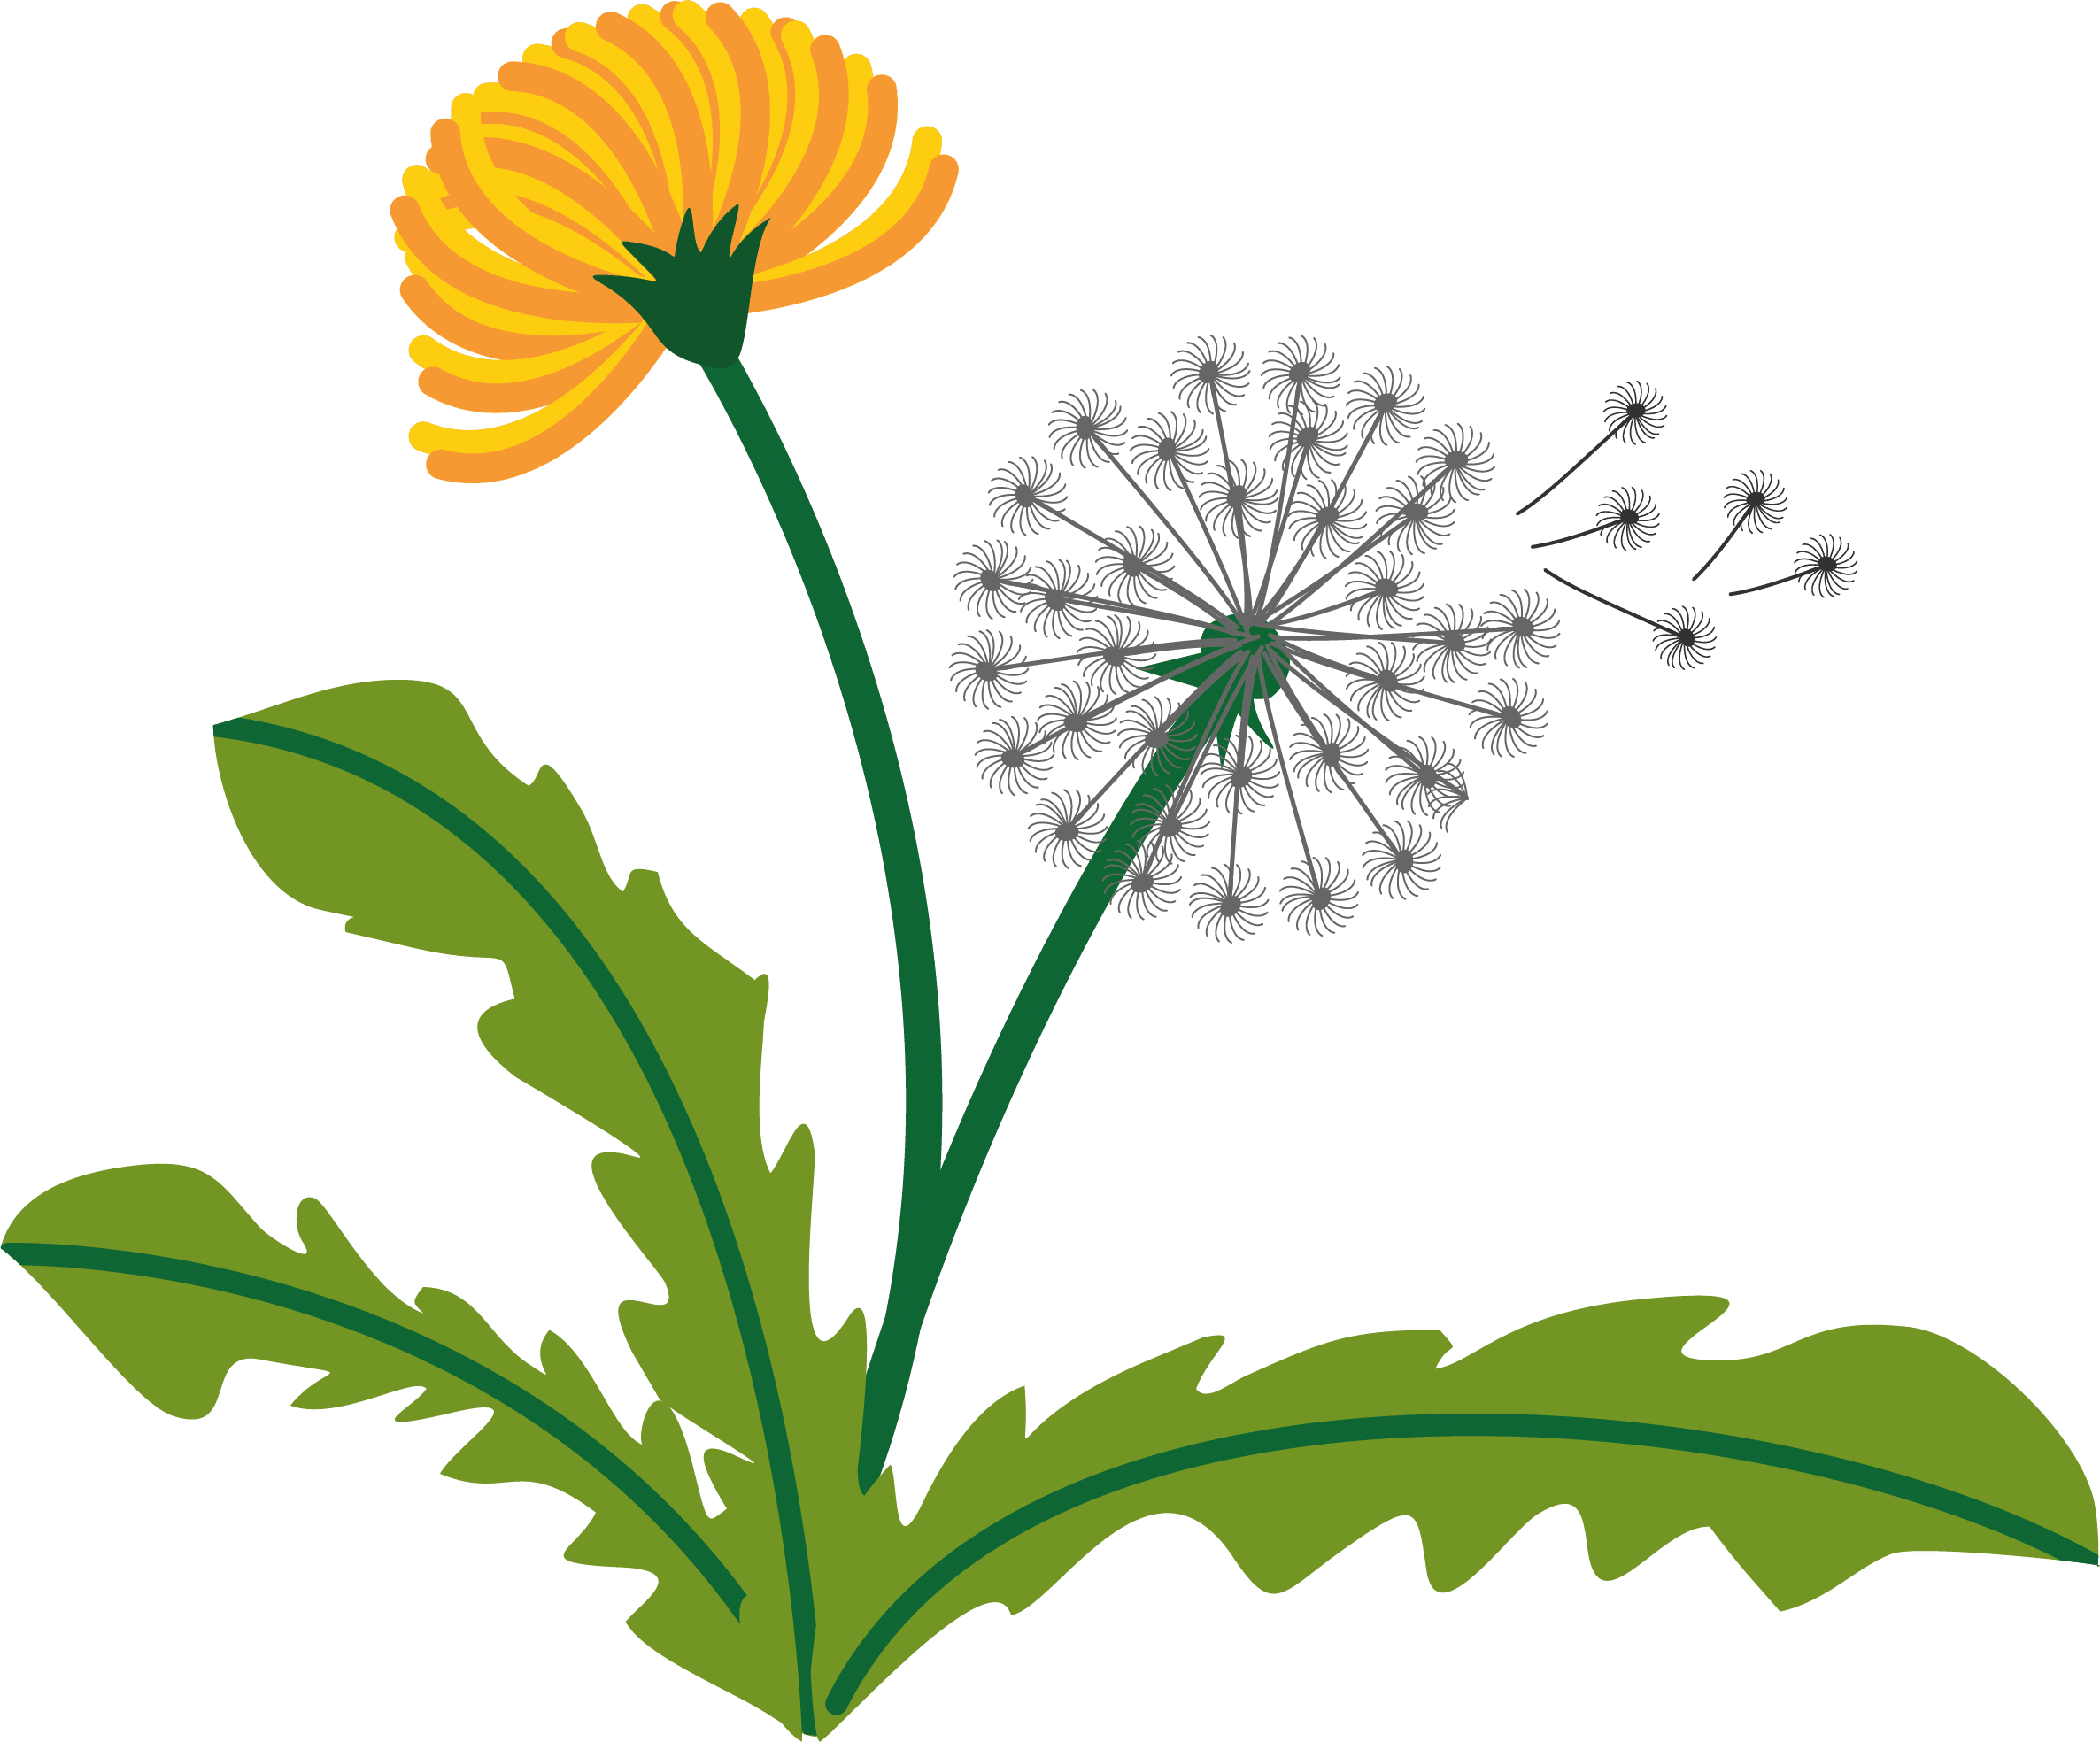 Dandelion should be celebrated for its health benefits